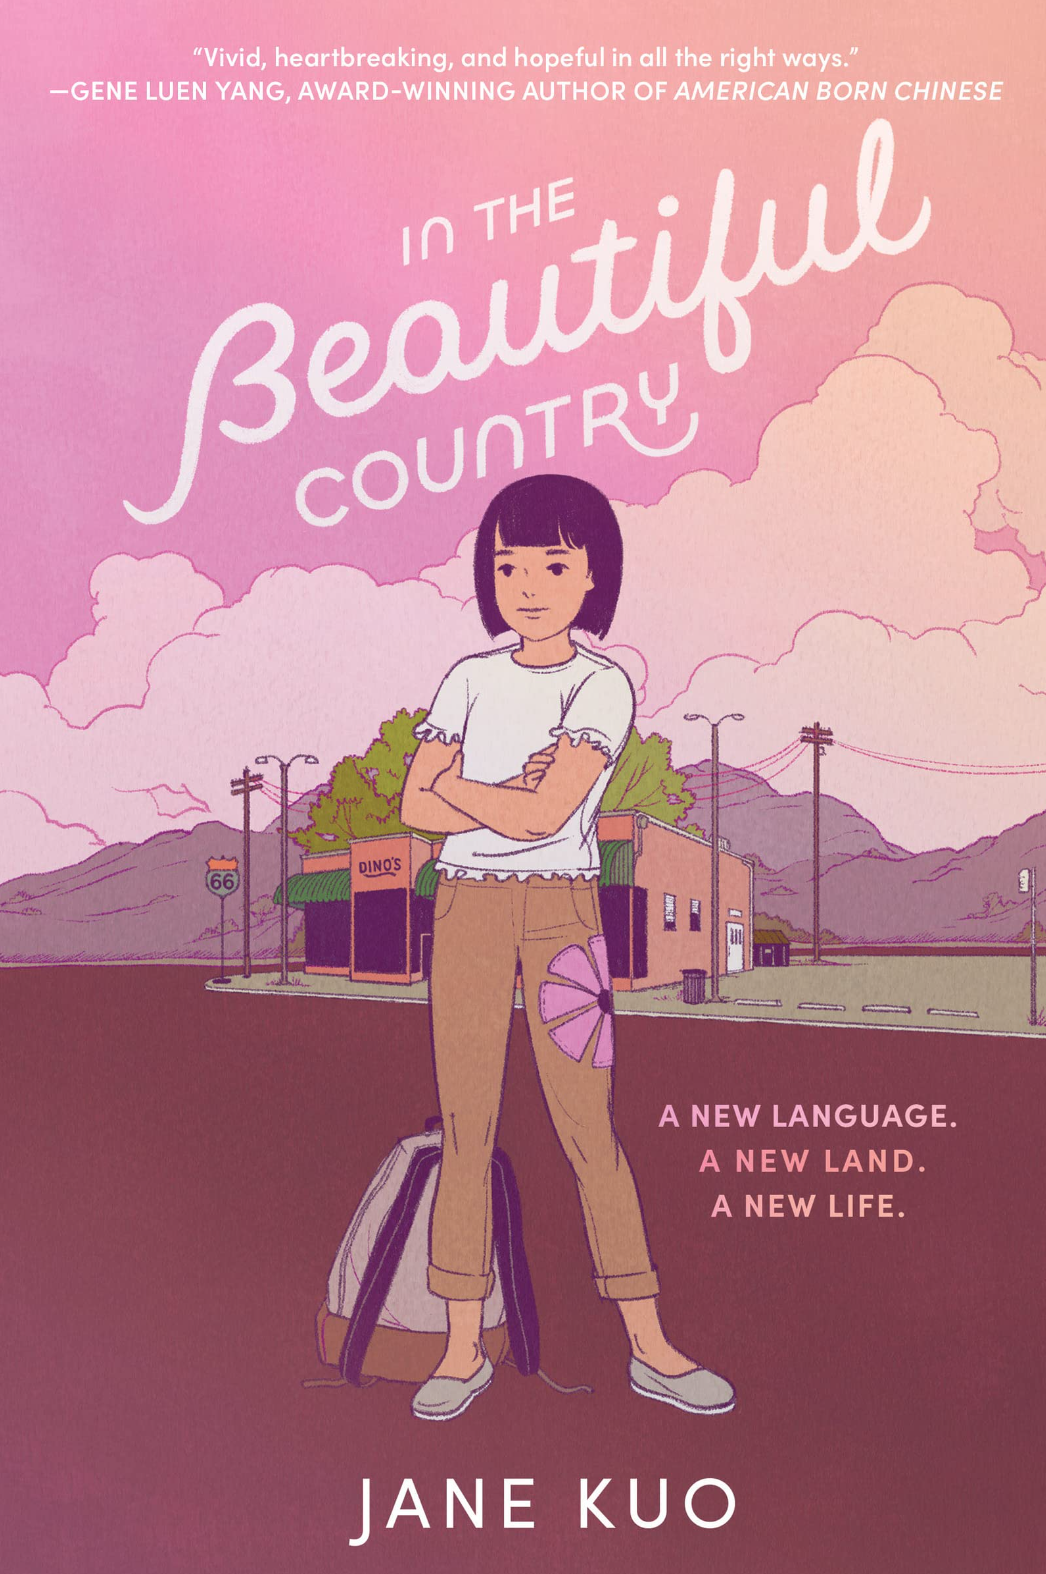 Anna, a Taiwanese girl, is standing in the middle of a road with her arms crossed and a backpack behind her. In the far distance is a restaurant and above that are clouds near the bookÃ¢â‚¬â„¢s title that reads Ã¢â‚¬Å“In the Beautiful Country.Ã¢â‚¬Â 